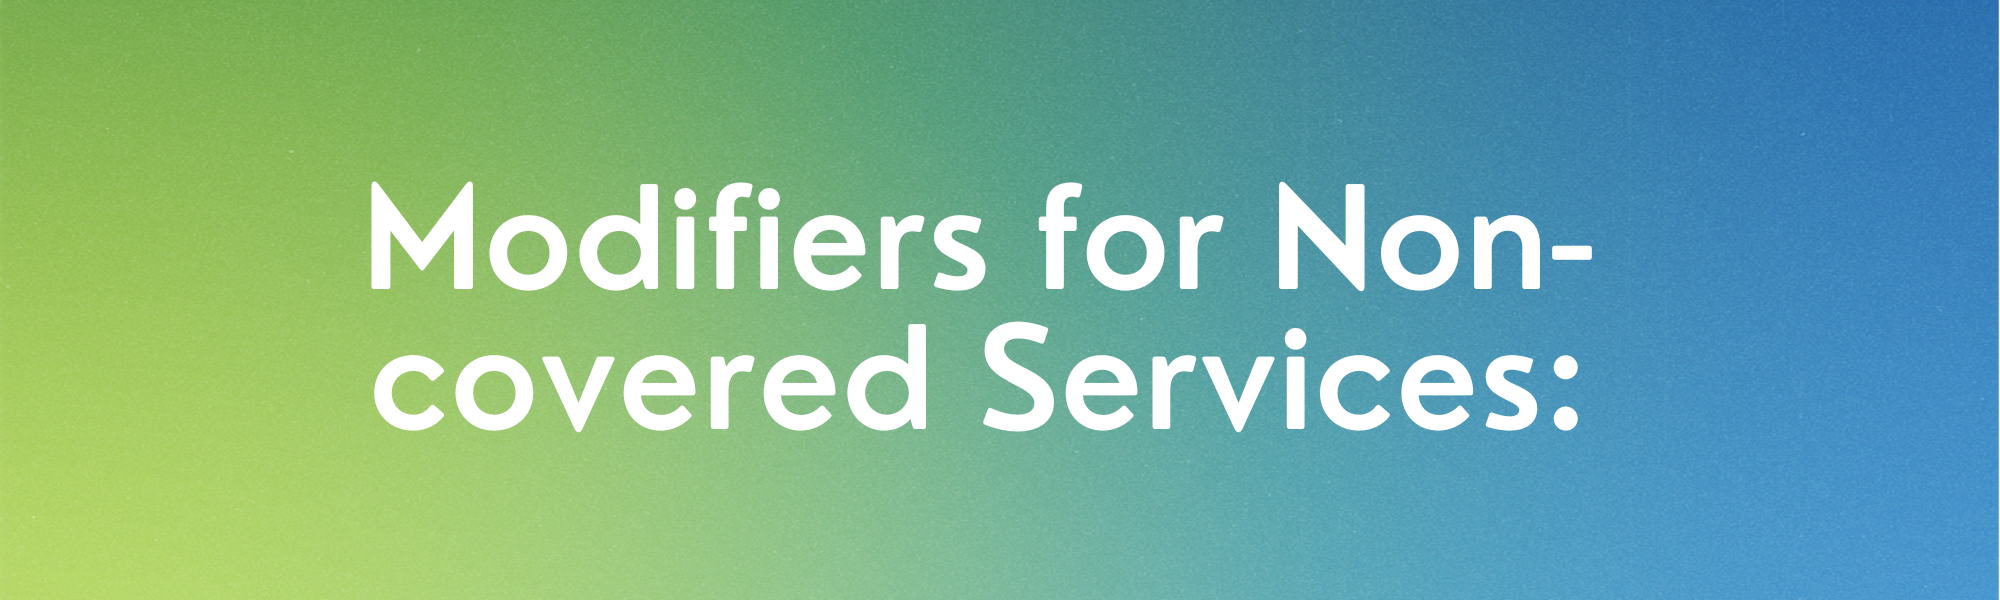 Modifiers for Non-covered Services: